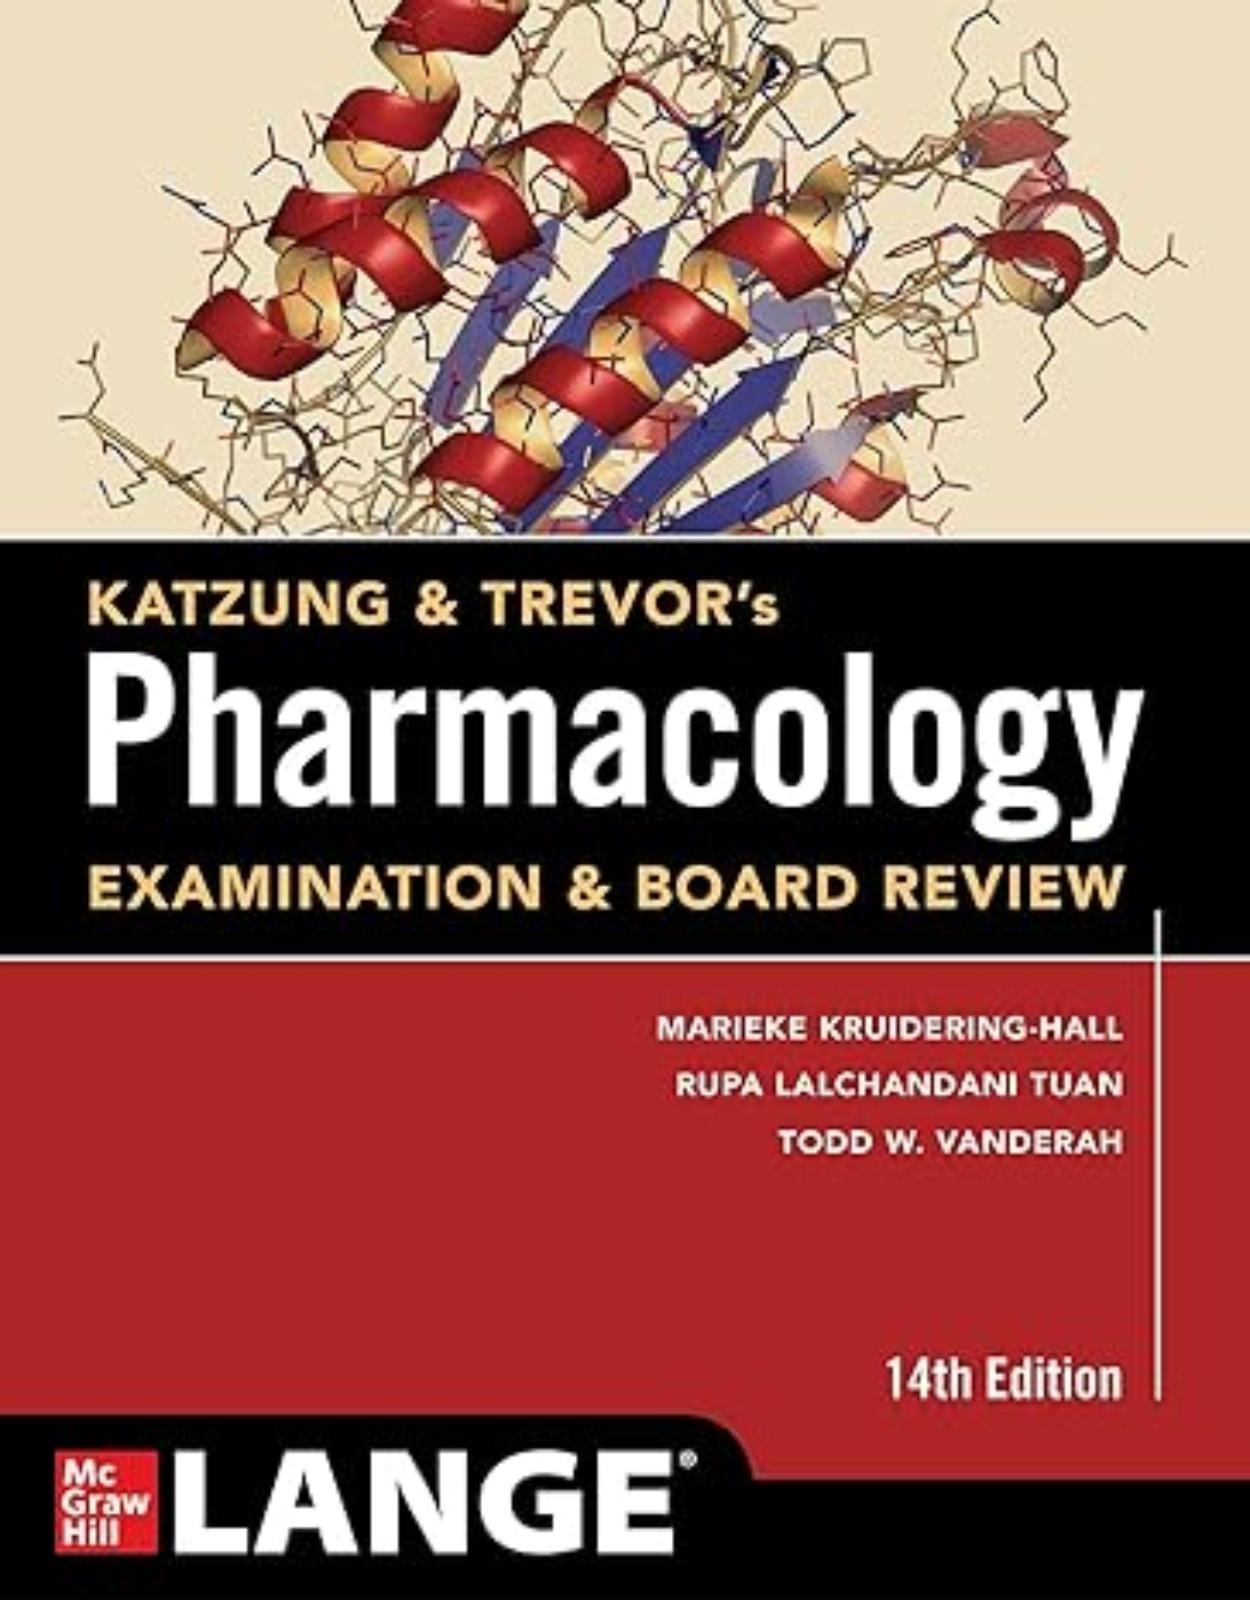 Ie Katzung’s Pharmacology Examination & Board Review, Fourteenth Edition